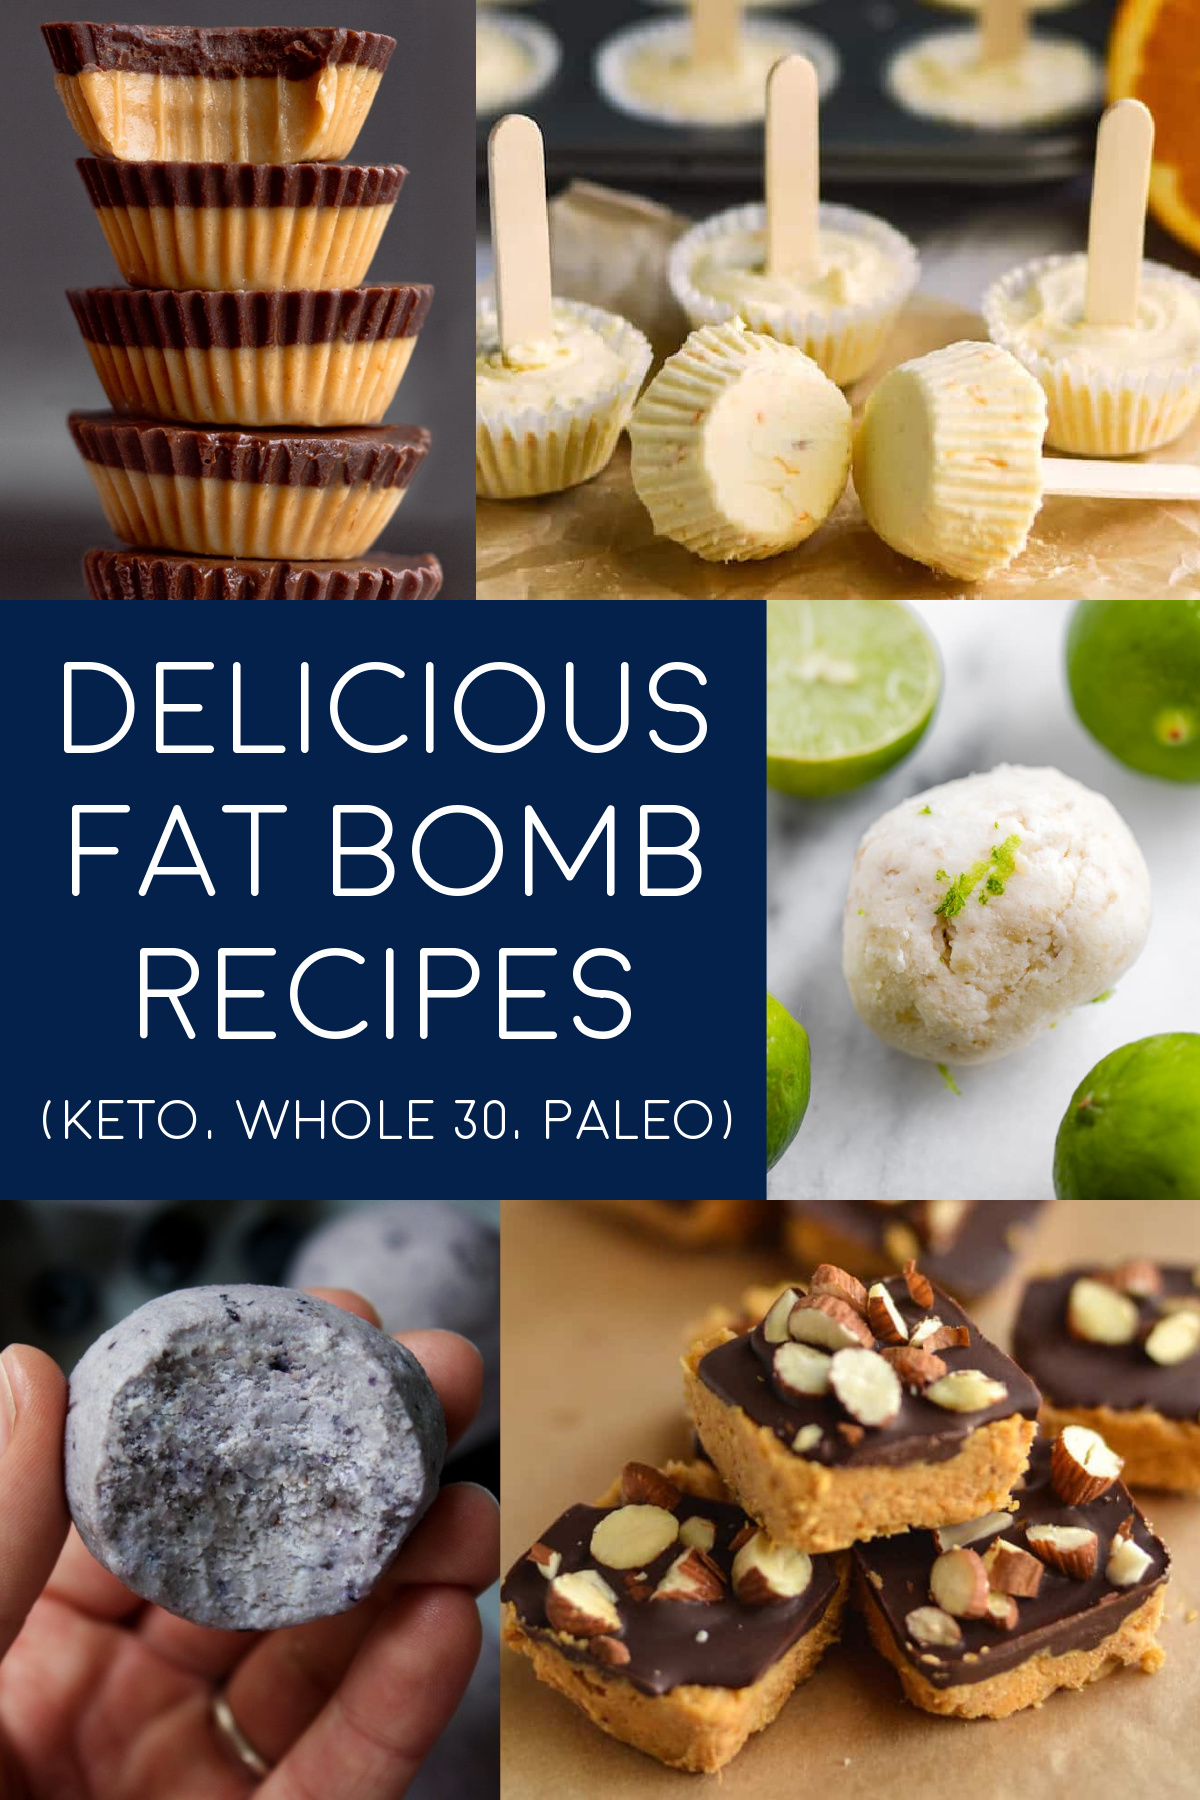 Delicious fat bombs